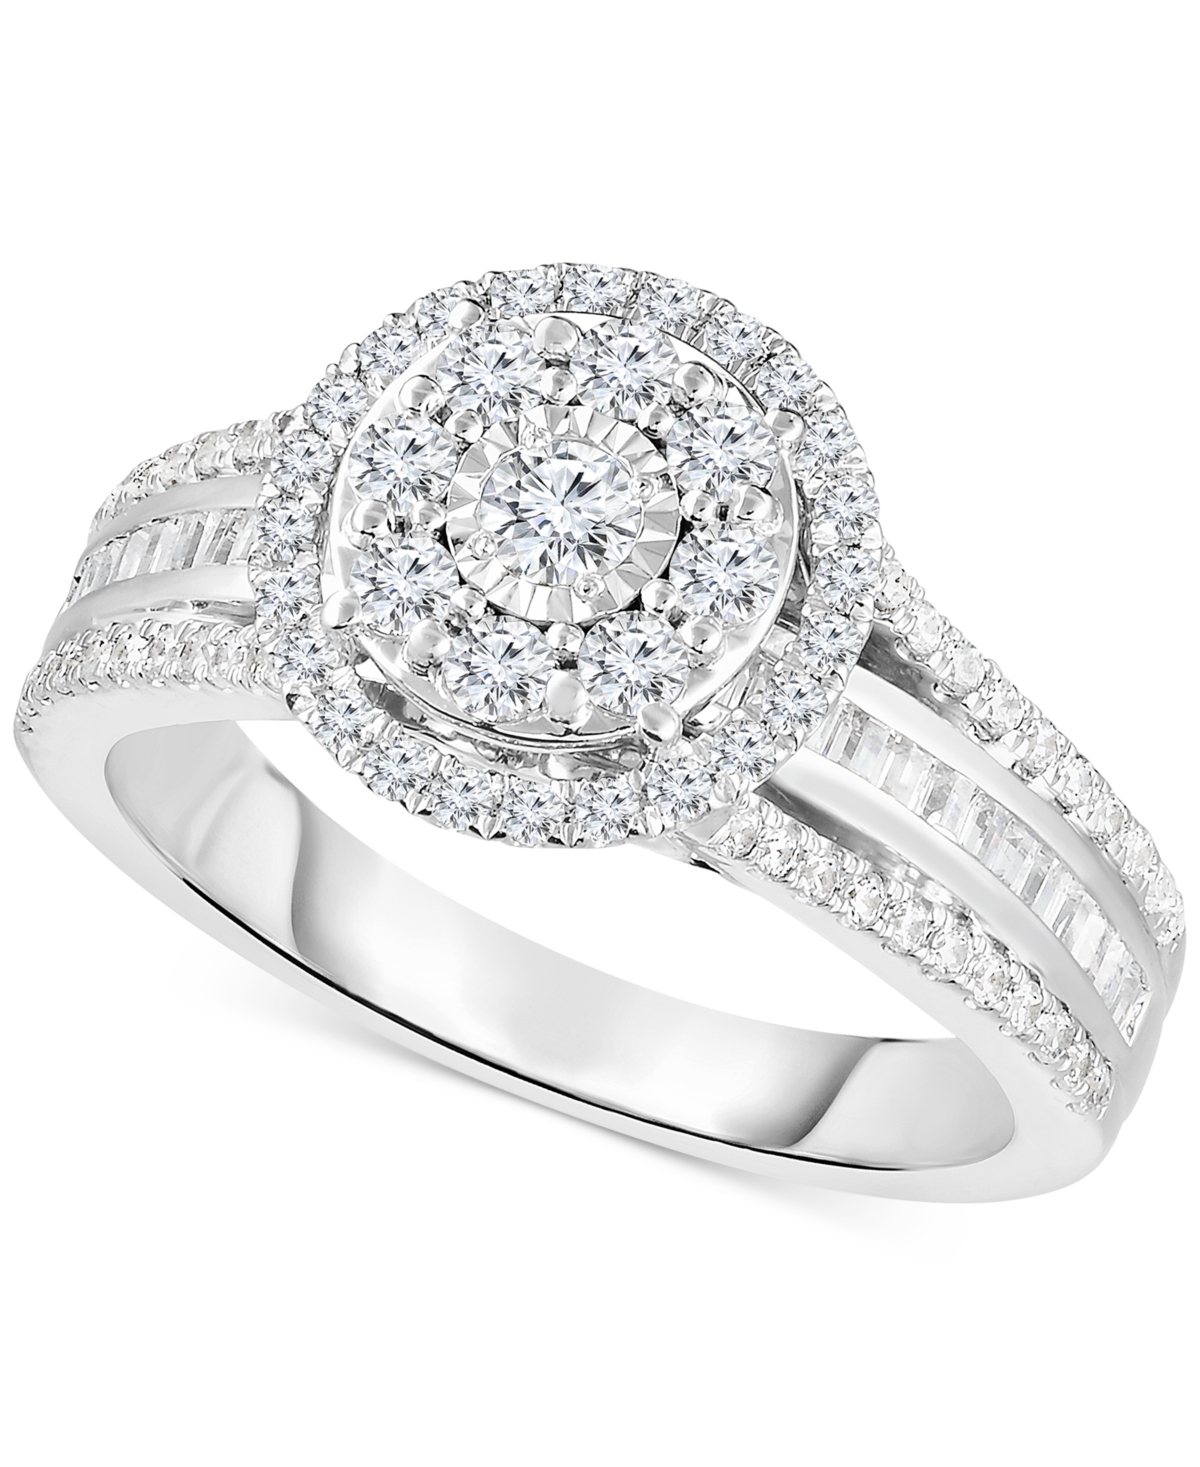 Diamond Halo Cluster Engagement Ring (1 ct. t.w.) in 10k White Gold - White Gold